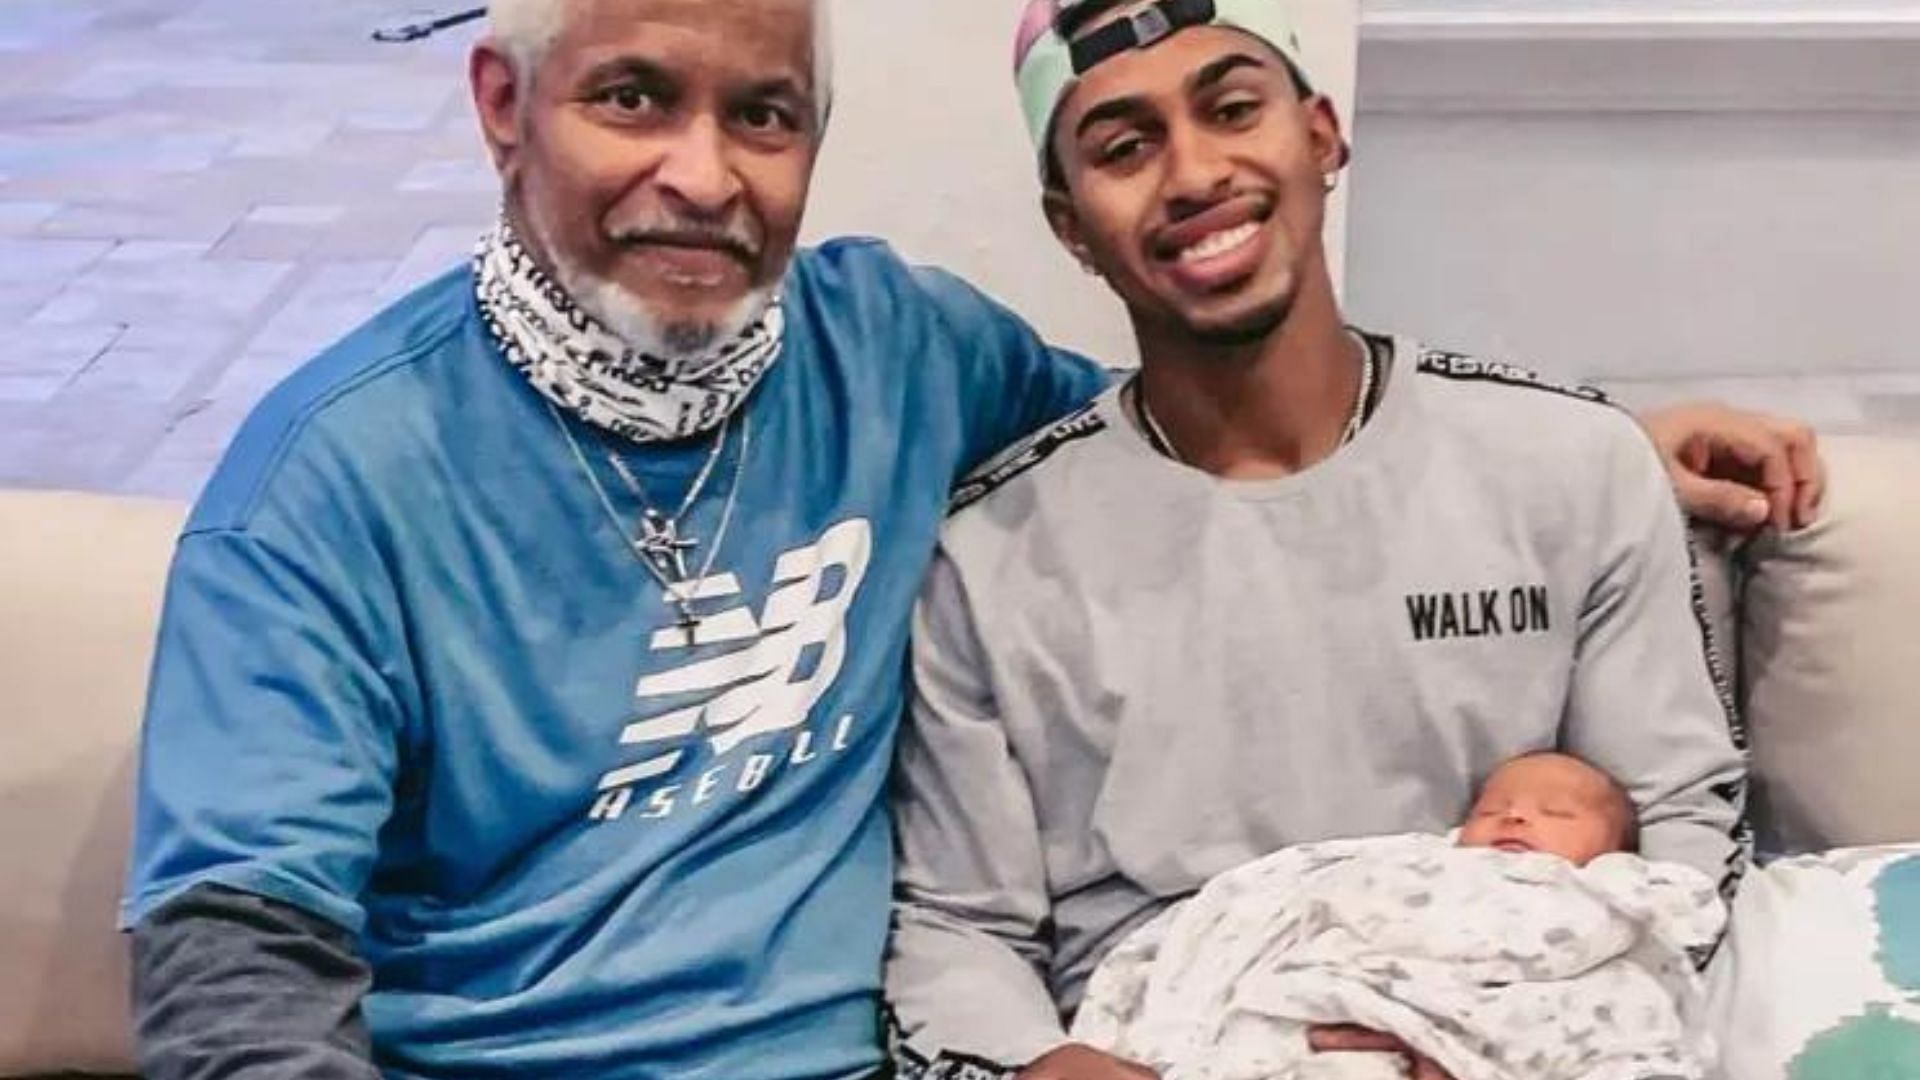 Who are Francisco Lindor's parents Maria and Miguel, and what is their  ethnicity? Personal life and family heritage of New York Mets star